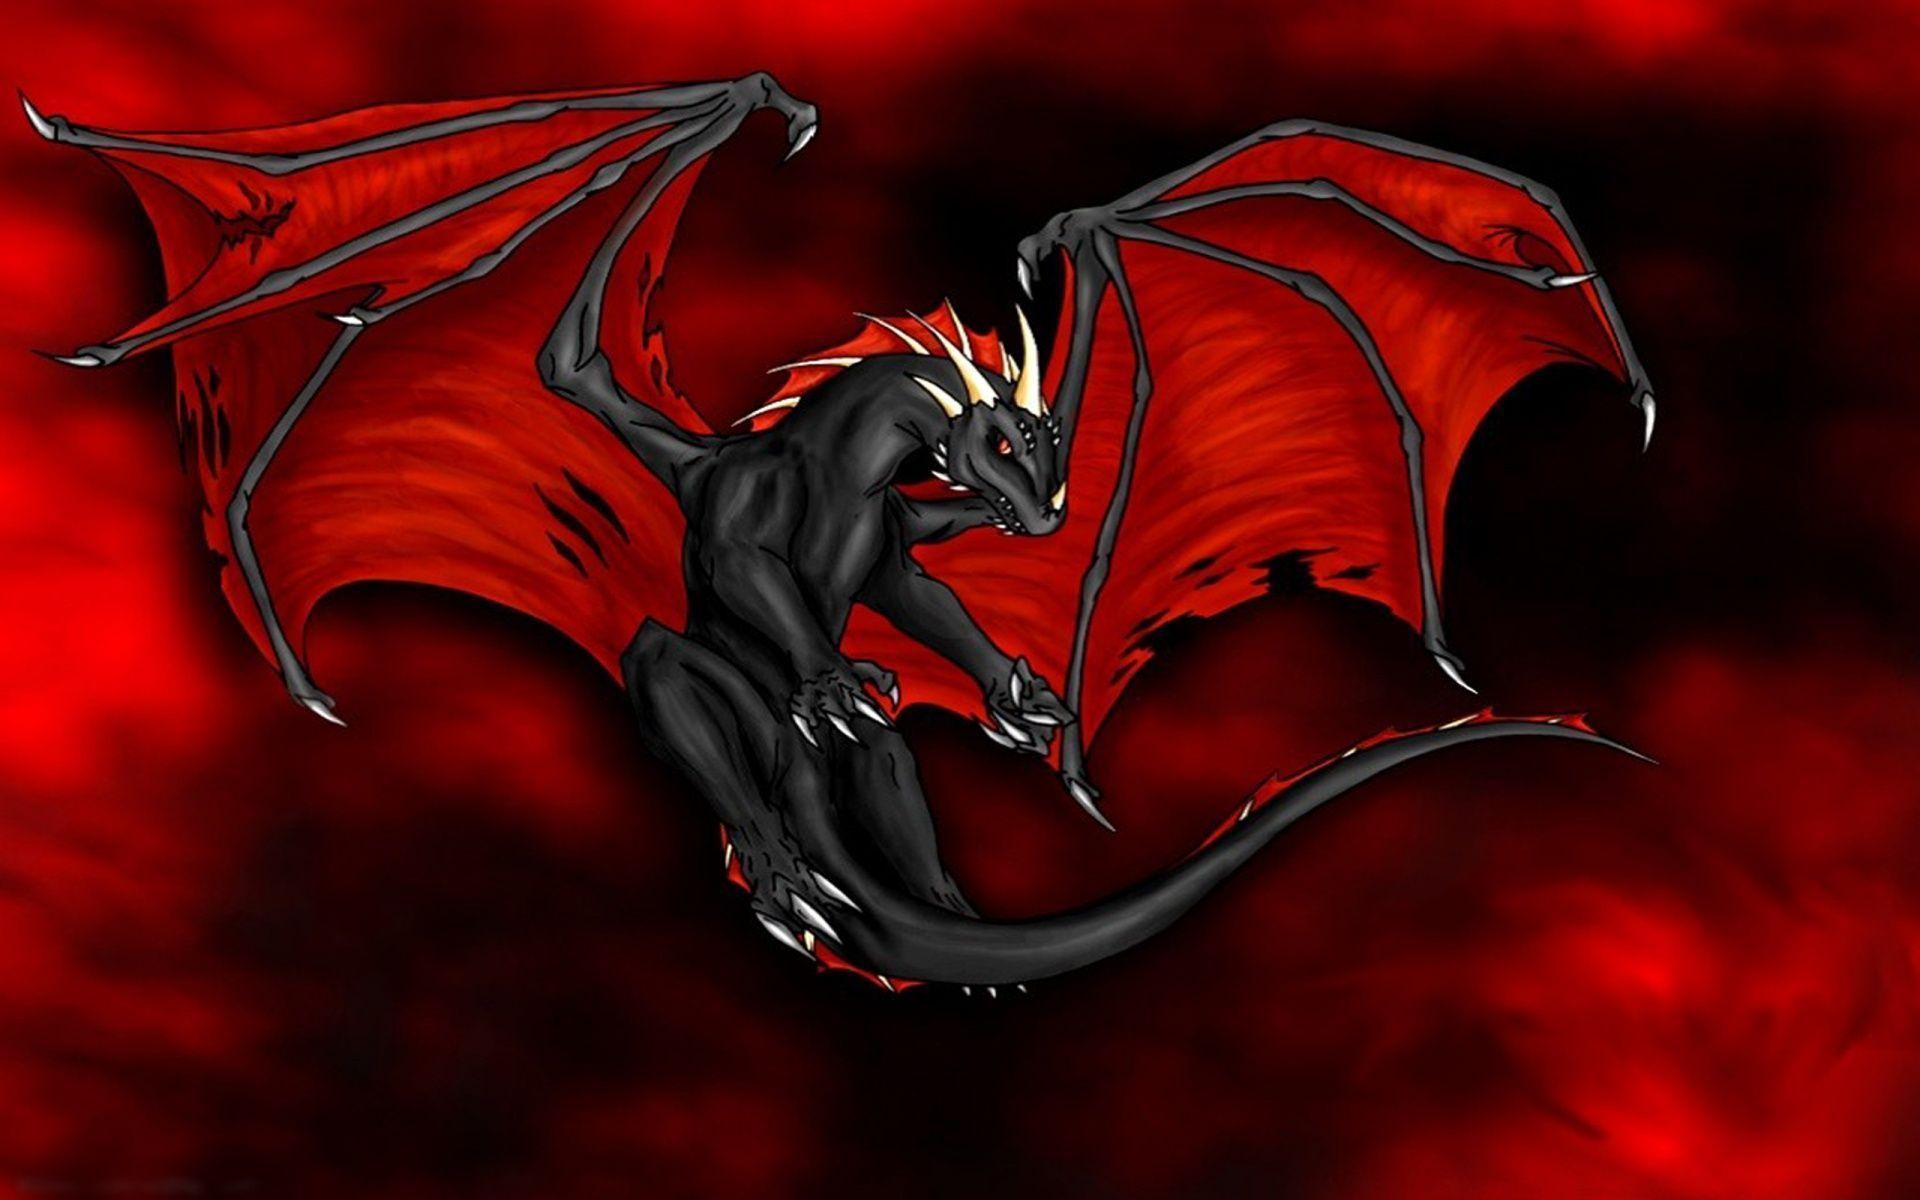 Wallpapers For > Red Dragon Wallpapers For Mobile